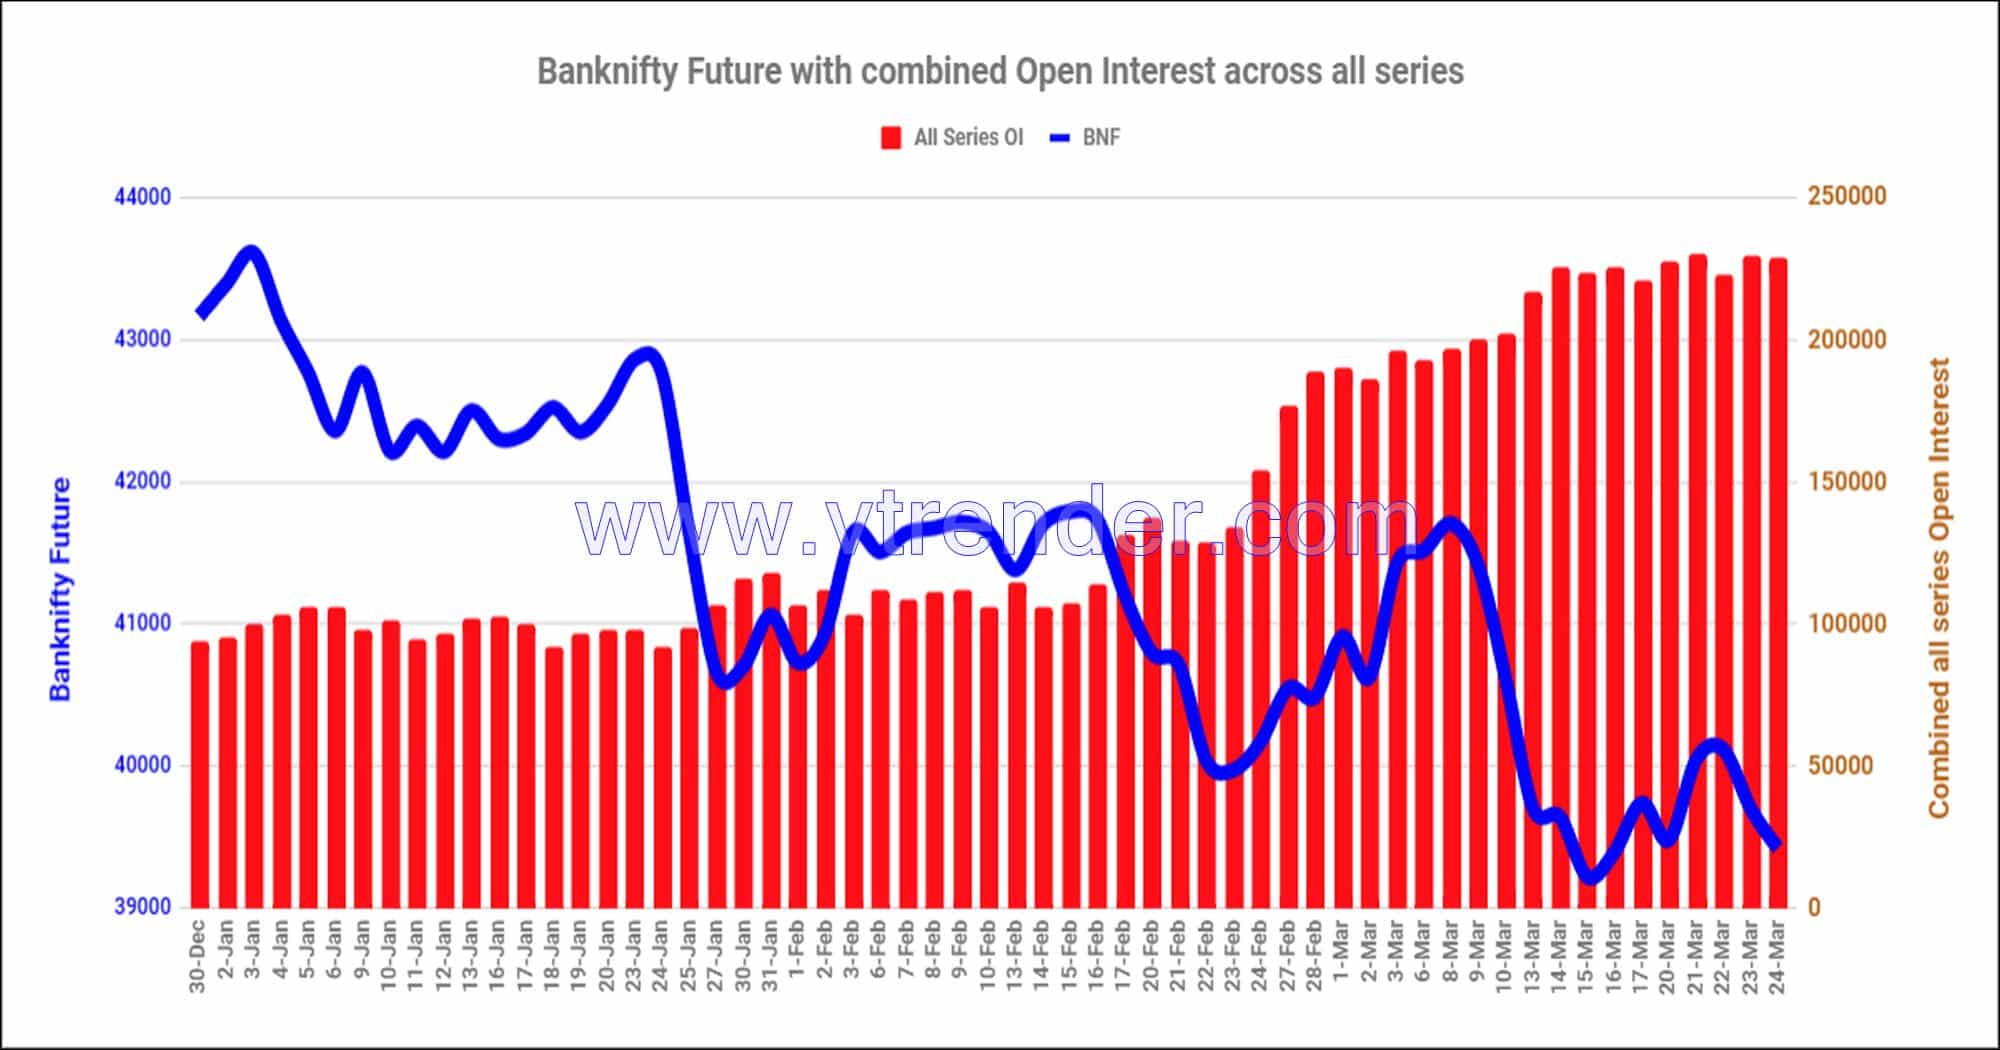 Bnf24Mar Nifty And Banknifty Futures With All Series Combined Open Interest – 24Th Mar 2023 Banknifty, Nifty, Open Interest